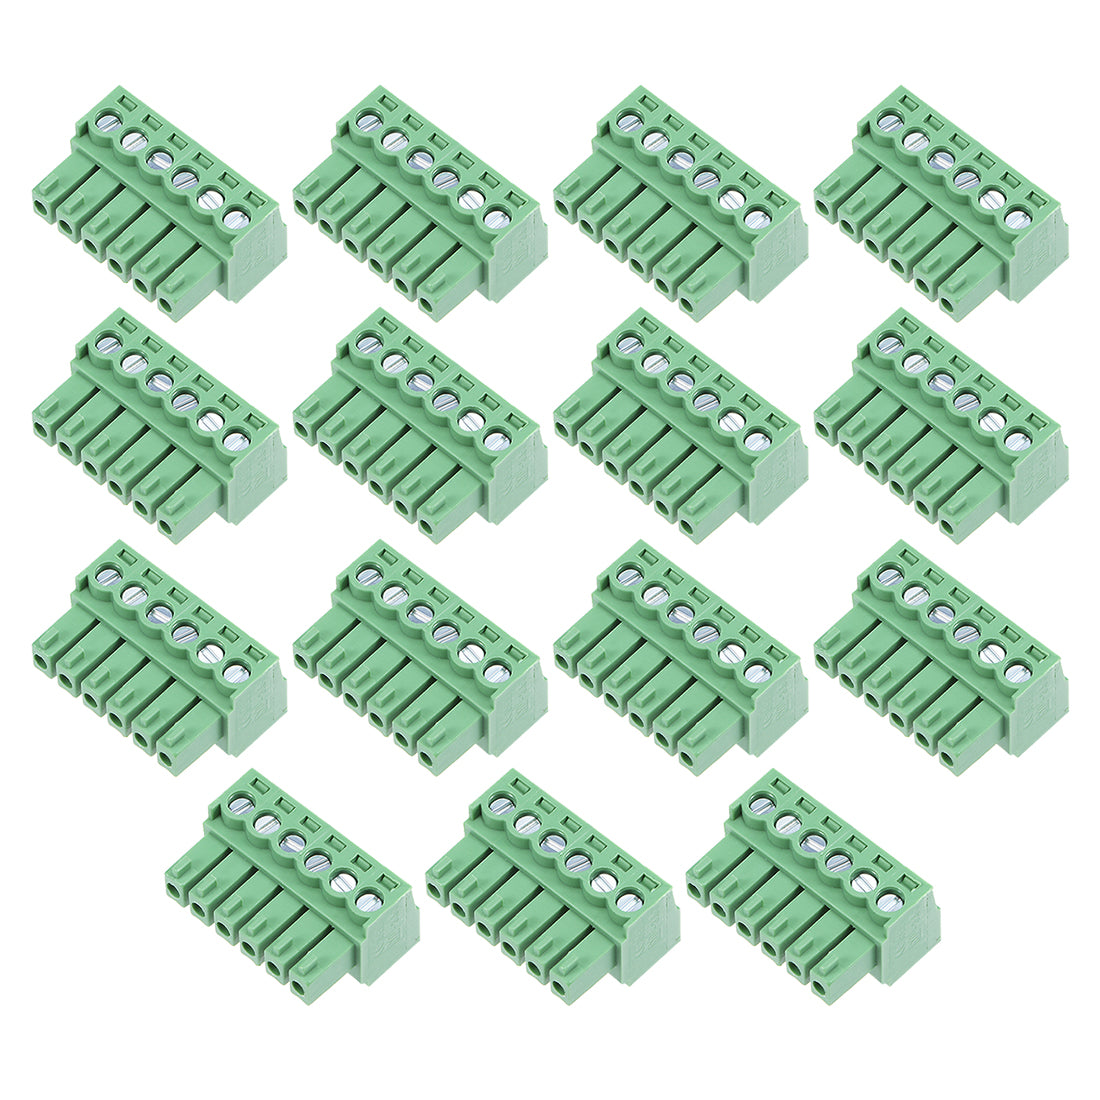 uxcell Uxcell 15Pcs AC300V 8A 3.5mm Pitch 6P Flat Angle Needle Seat Insert-In PCB Terminal Block Connector green